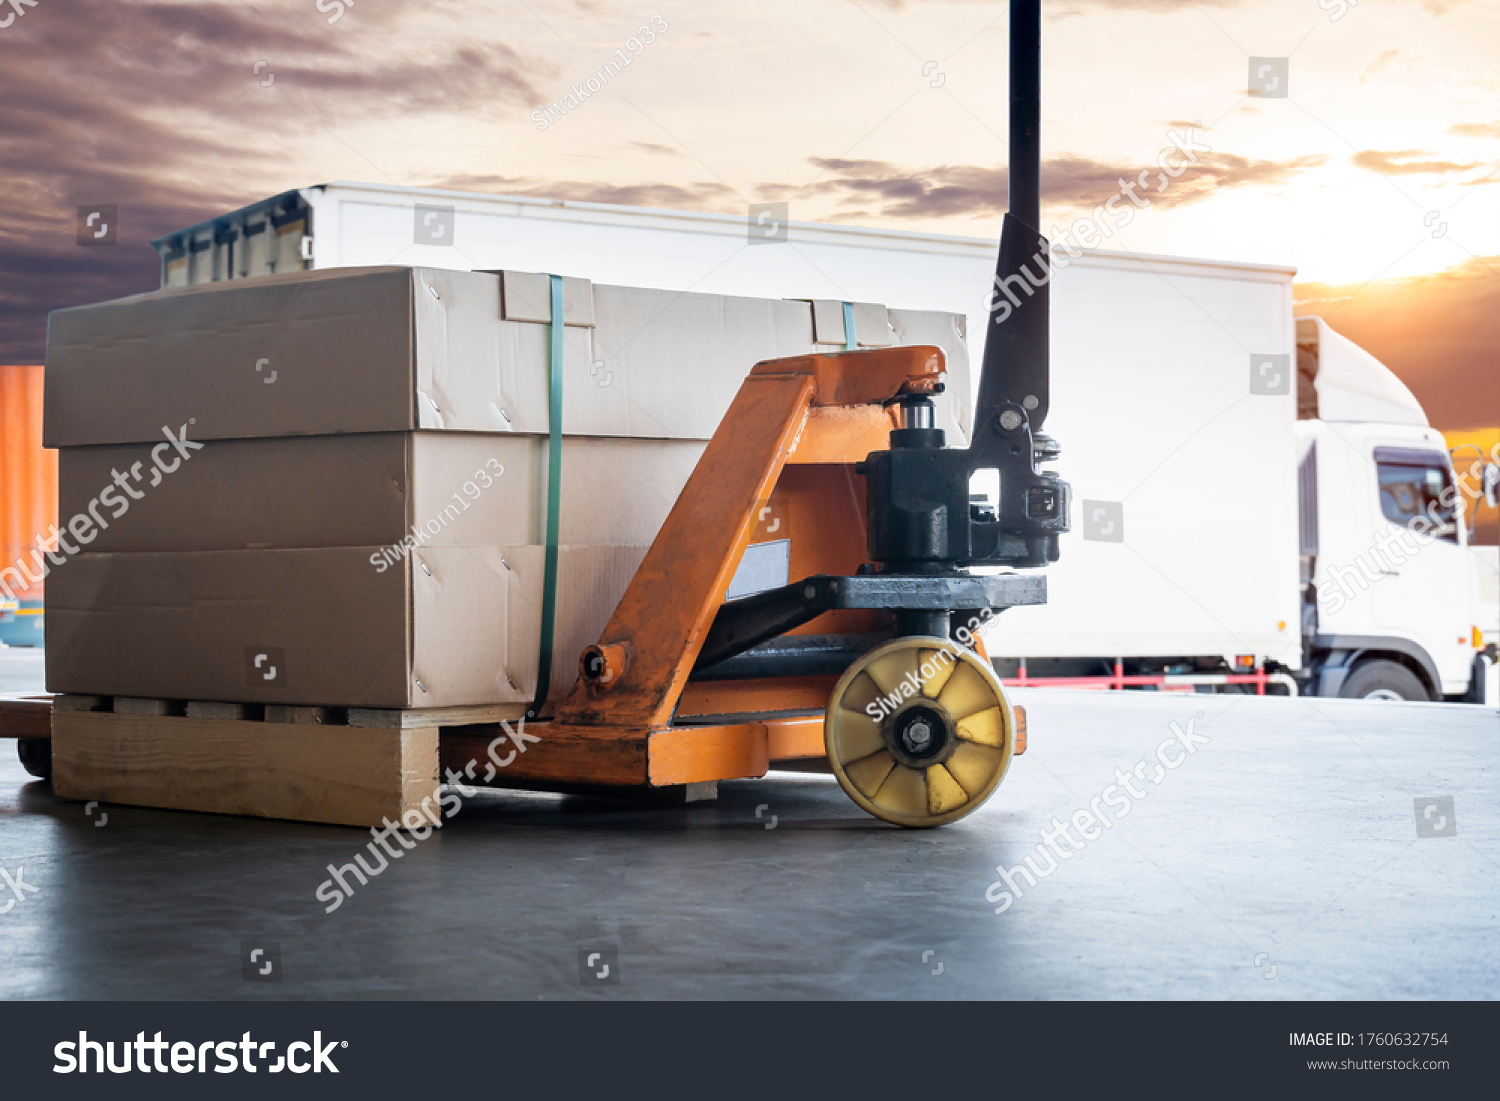 Cargo shipment loading for truck. Large shipments pallet goods with hand pallet truck waiting for load into a truck. Road freight cargo industry. Logistics and transportation. #1760632754